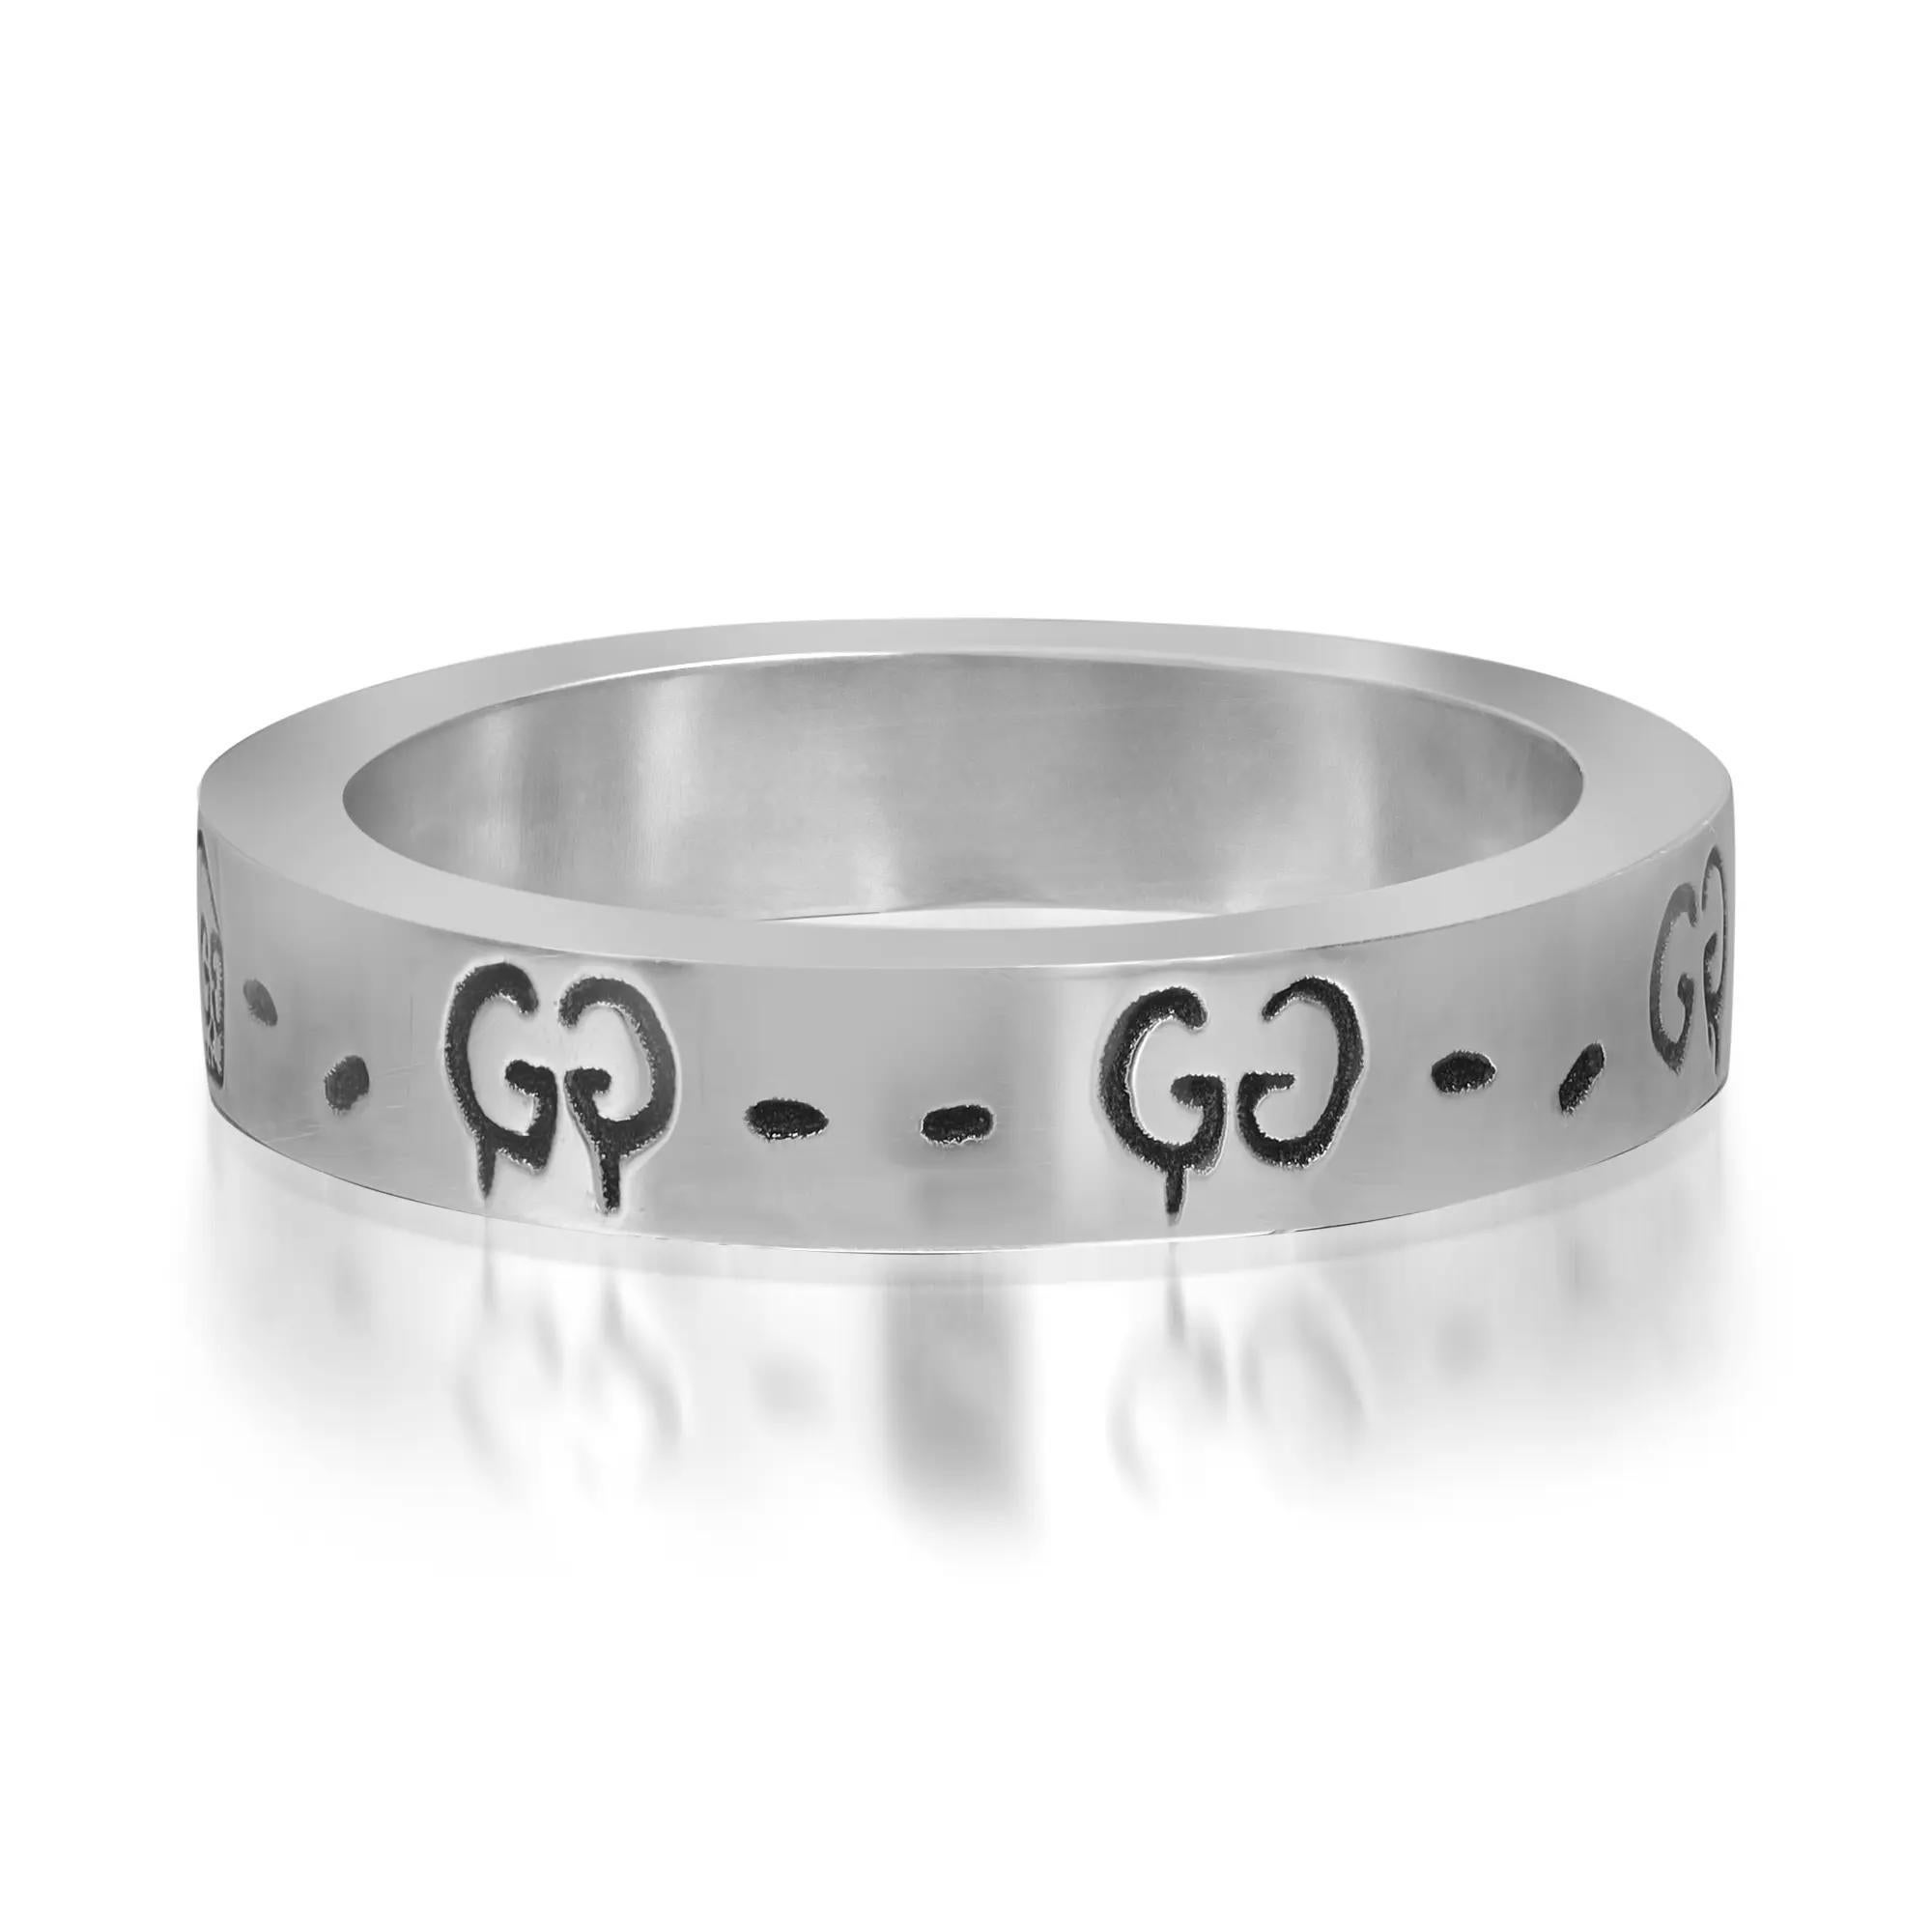 This ring features a repeating engraved Gucci Ghost motif all the way around the band, a design collaboration with Gucci and artist Trouble Andrew. Designed in 925 sterling silver. Ring size: 14 US 7. Ring width: 4mm. Total weight: 4.89 grams. Made